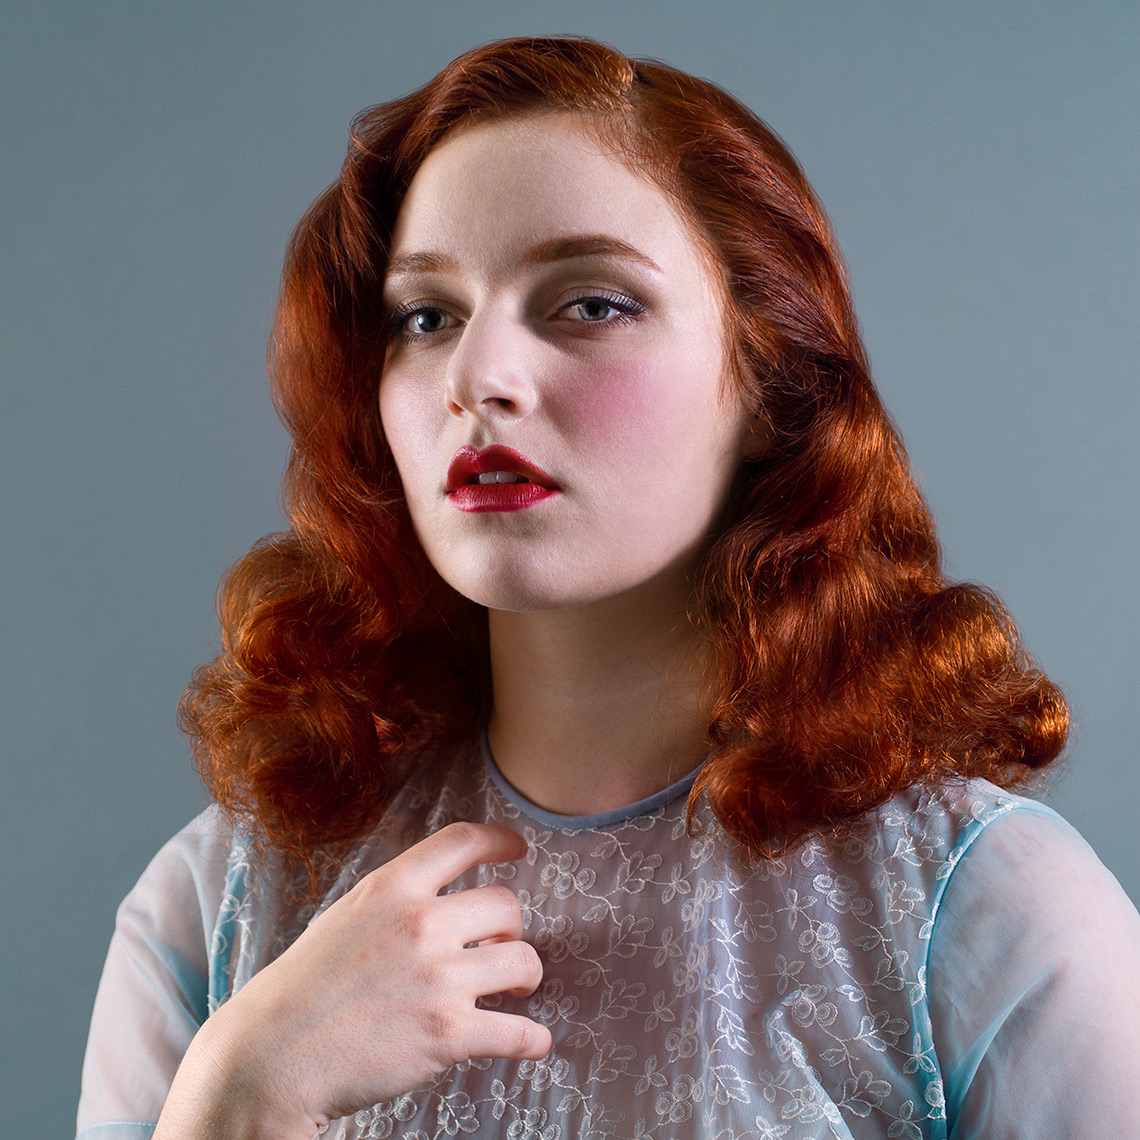 Head & shoulders beauty portrait of a pretty, fair, blue-eyed young woman with shoulder-length wavy red hair, bright red lipstick, and a sheer  light blue silk short-sleeved blouse